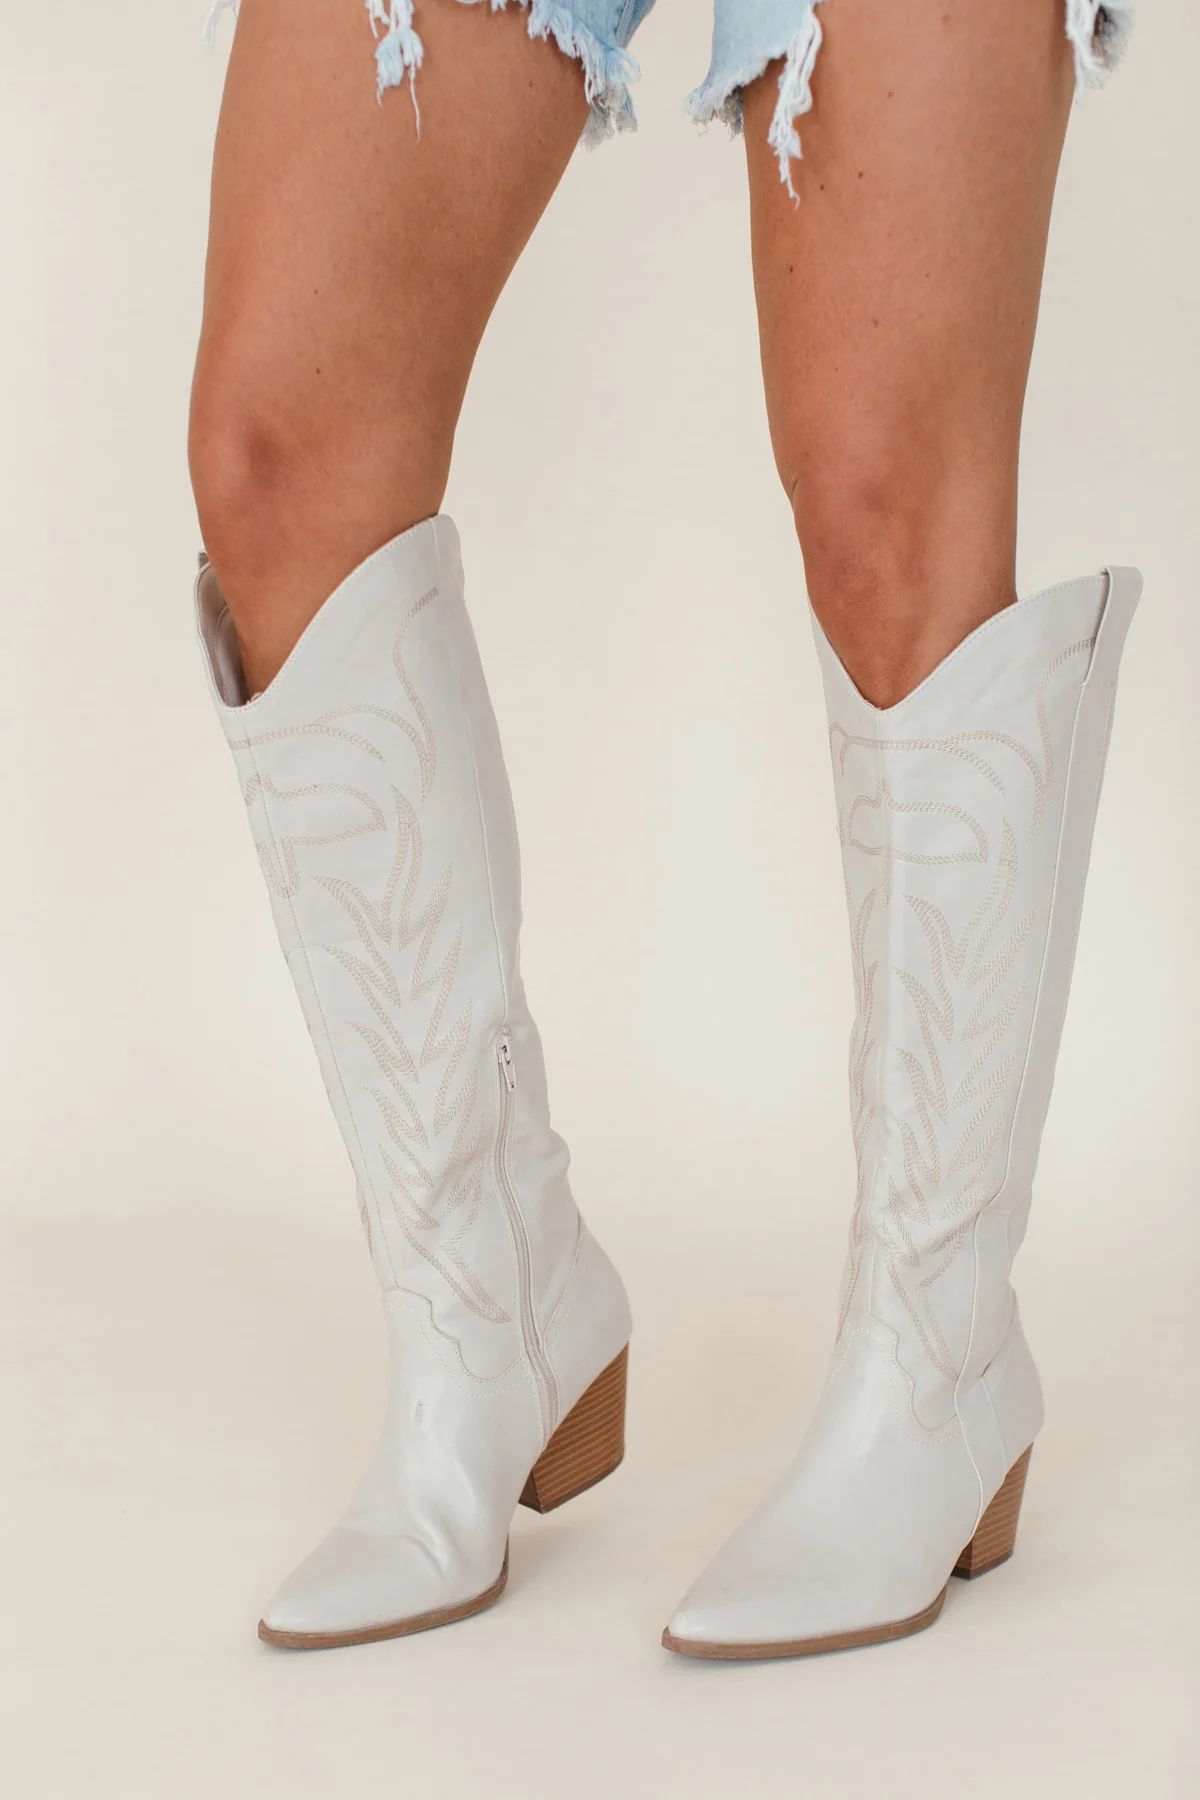 Postie Western Stone Boots | The Post